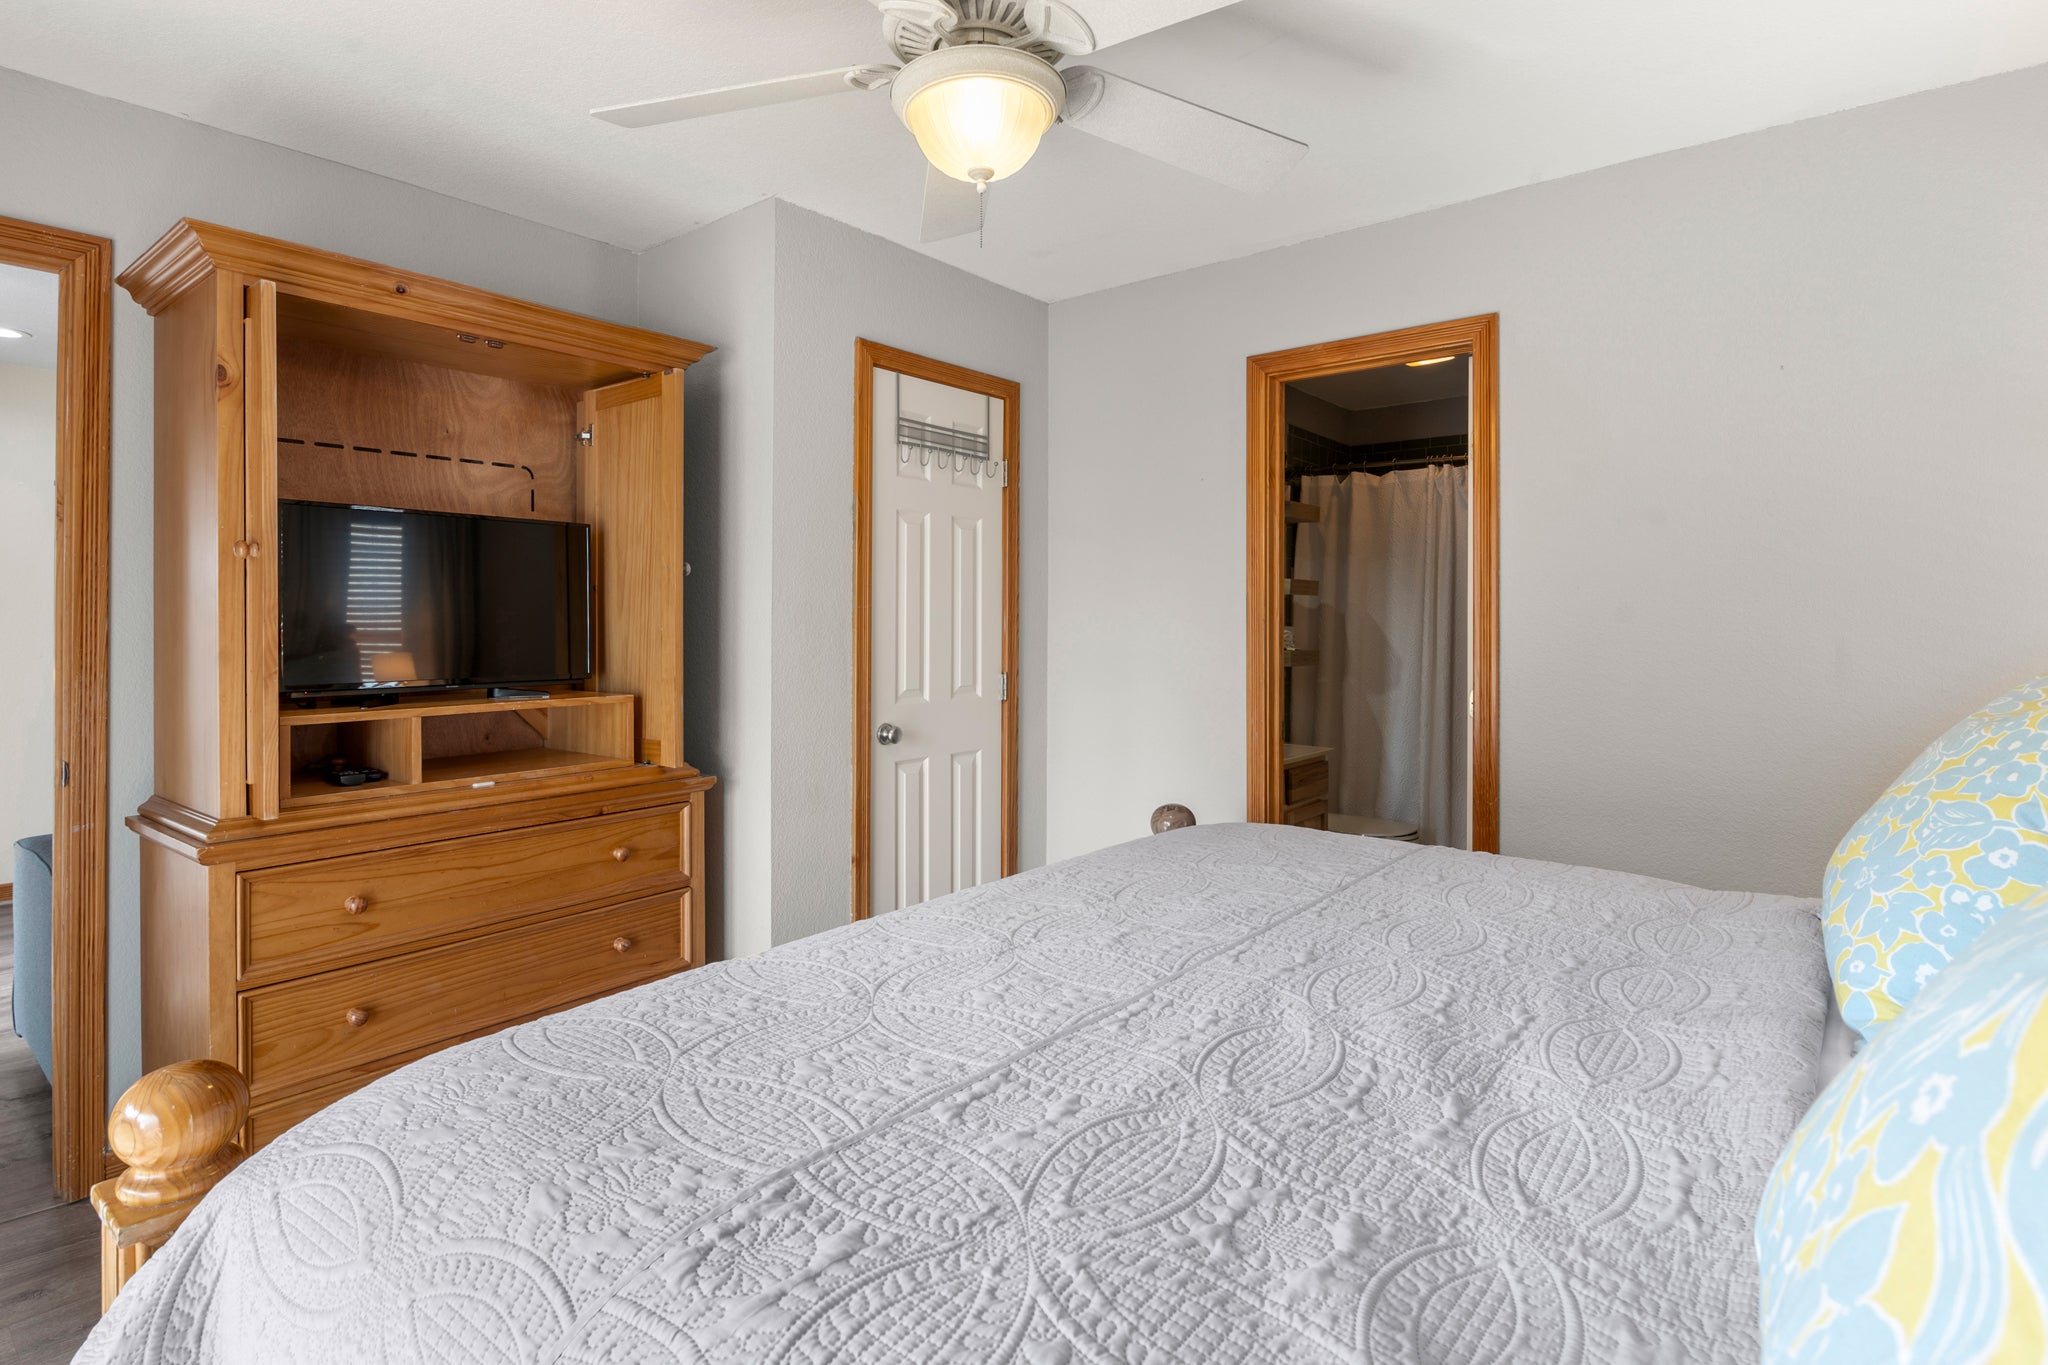 OSO101: Joshua's Place | Mid Level Bedroom 6